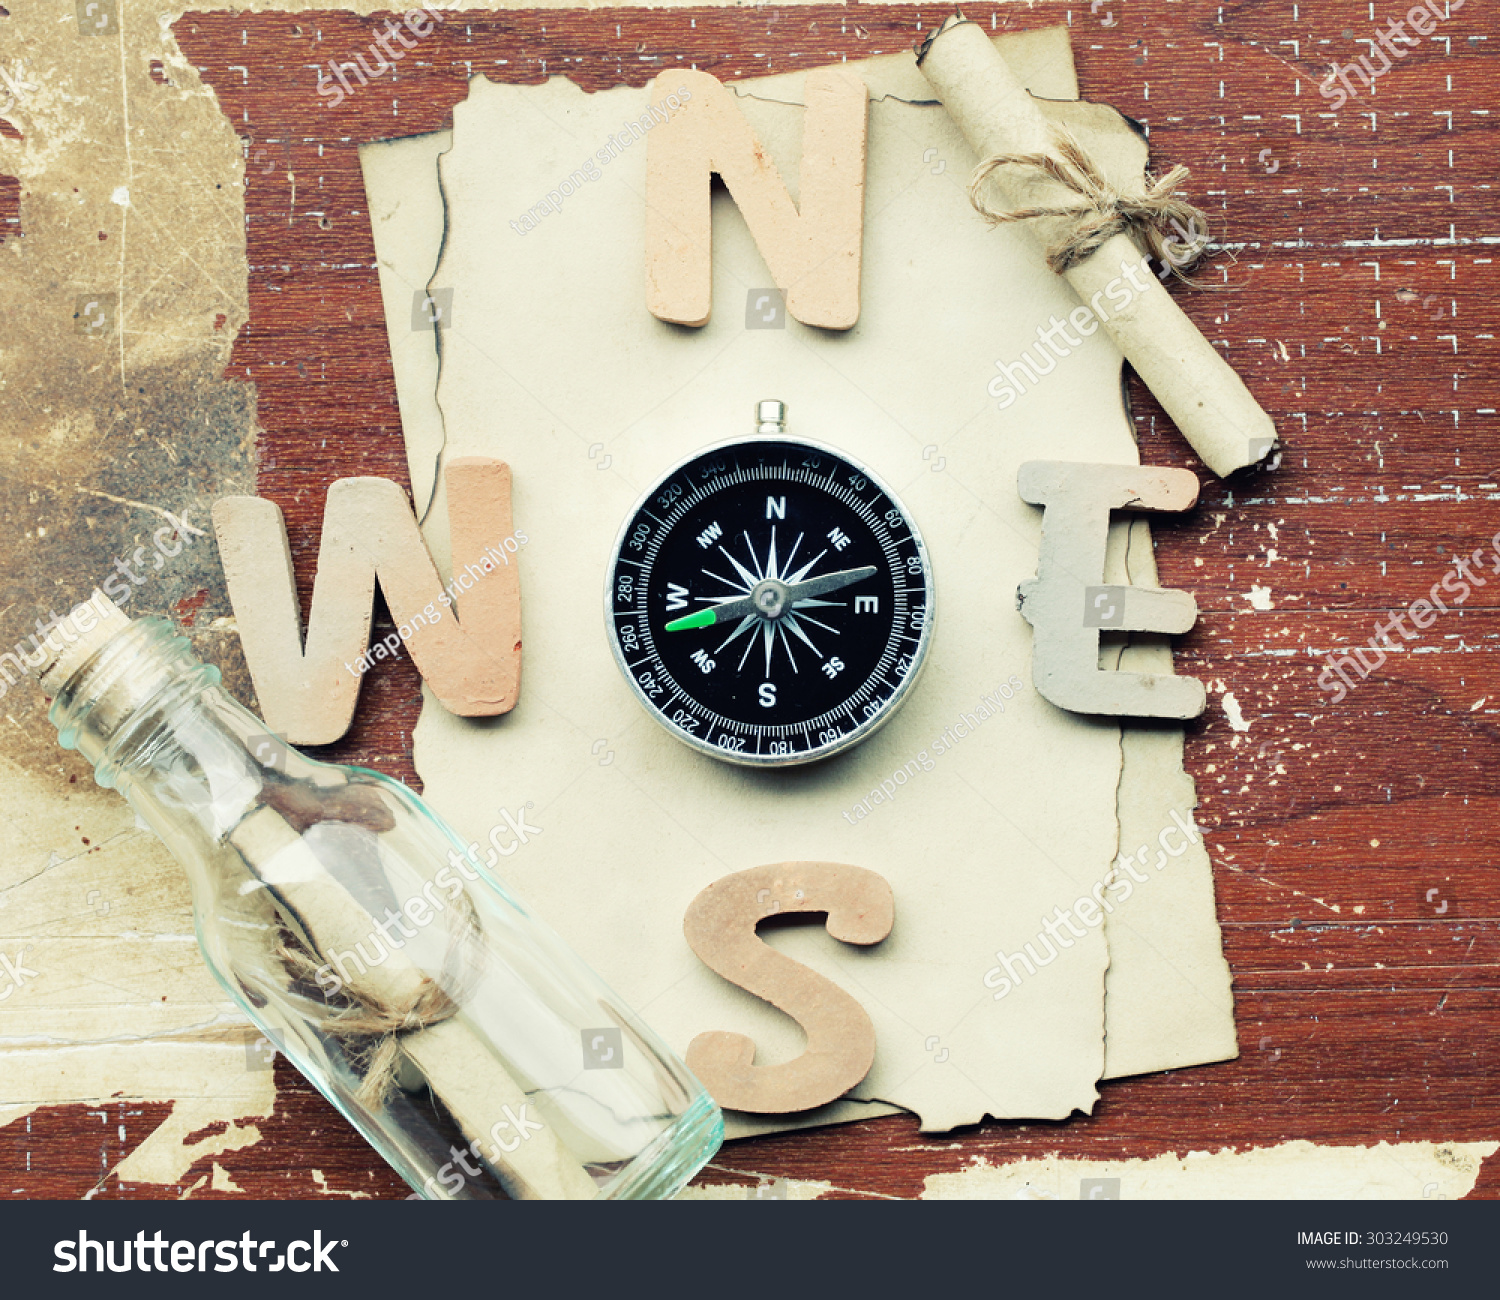 Compass Bottle Mail On Brown Aged Stock Photo 303249530 - Shutterstock